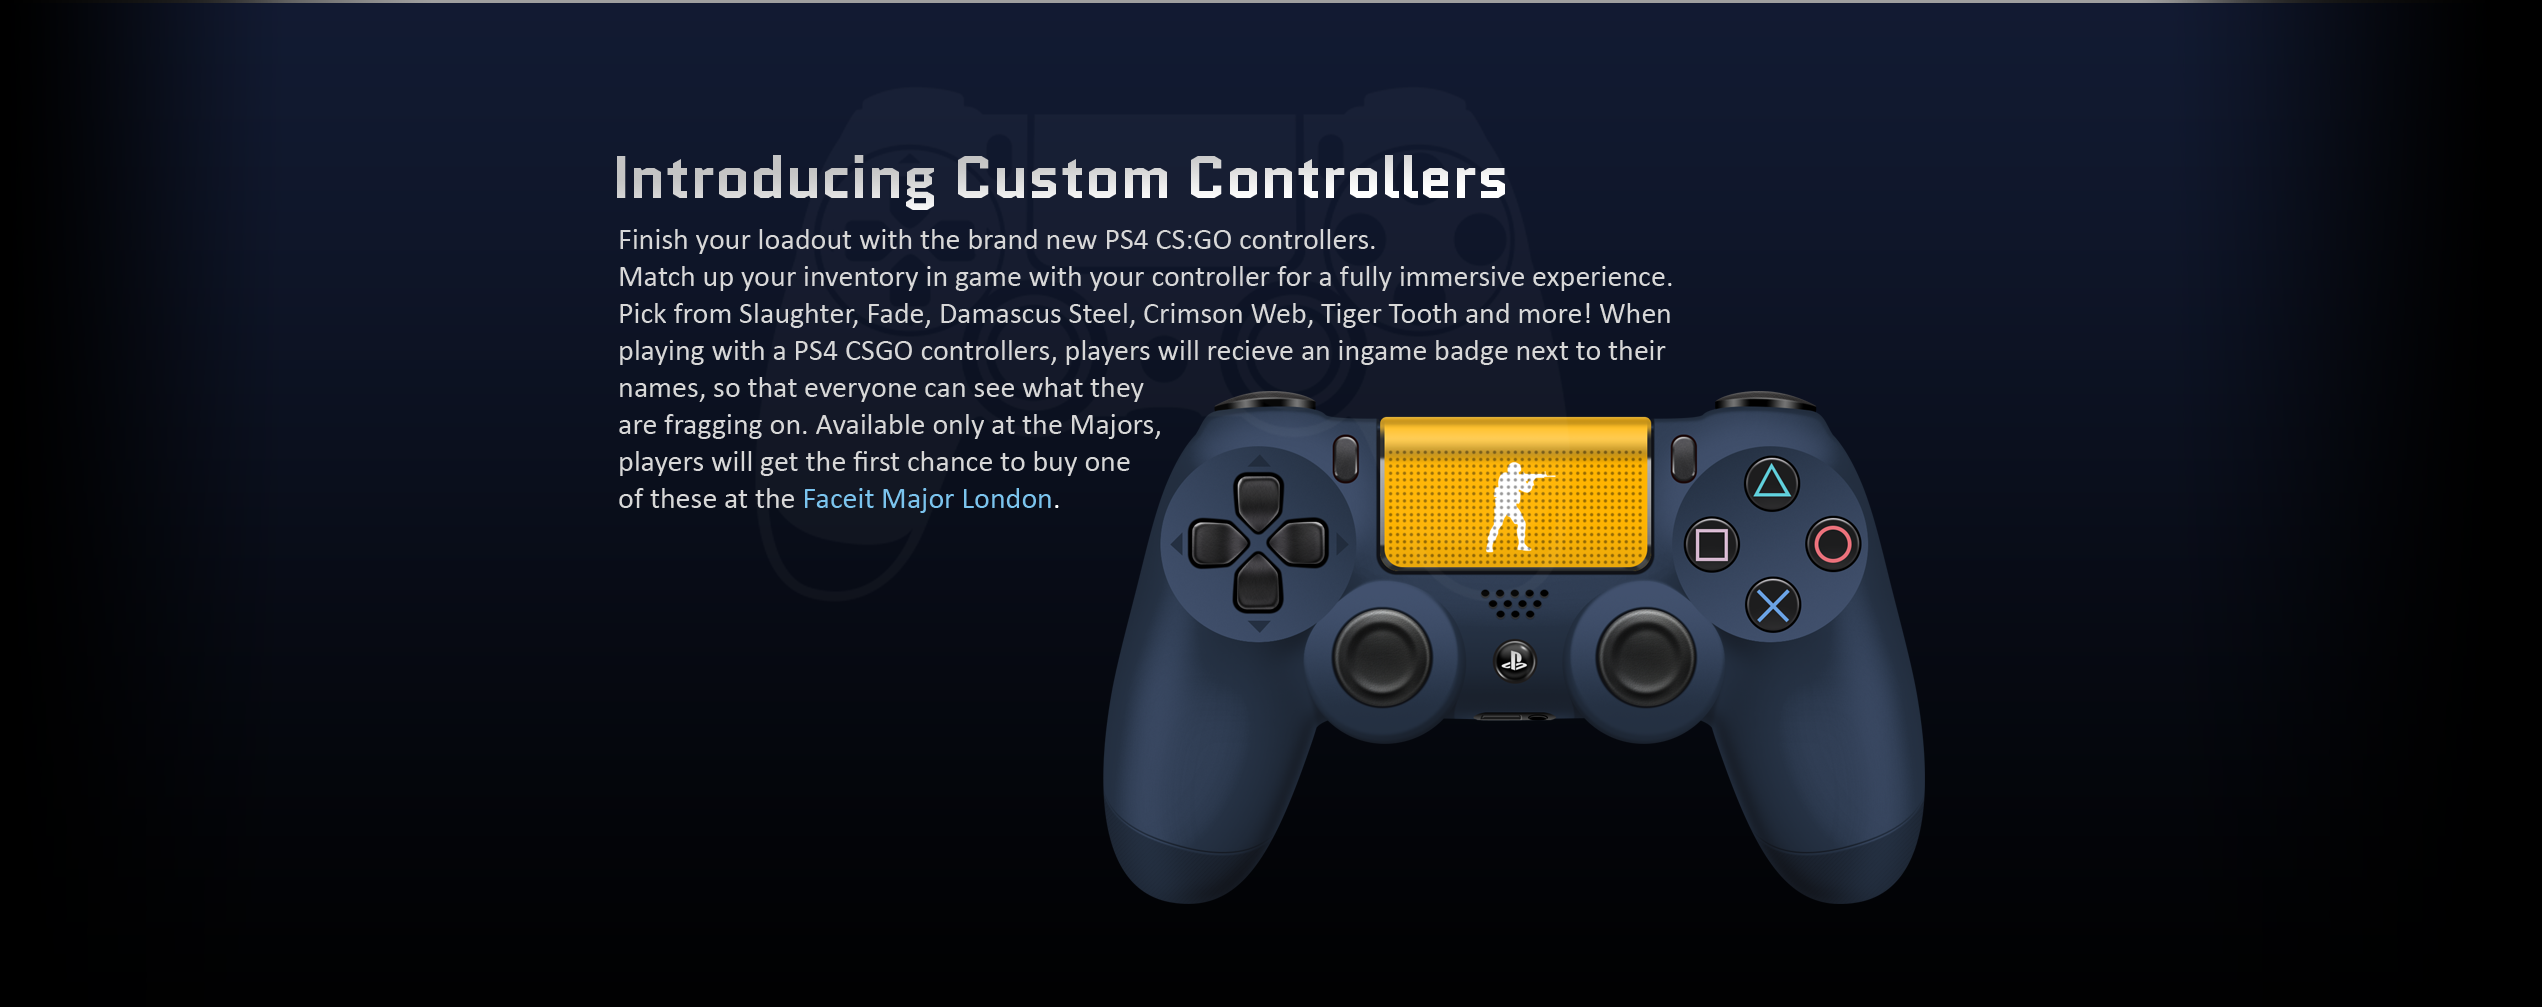 CSGO_PS4_Introducing_Custom_Controllers.png